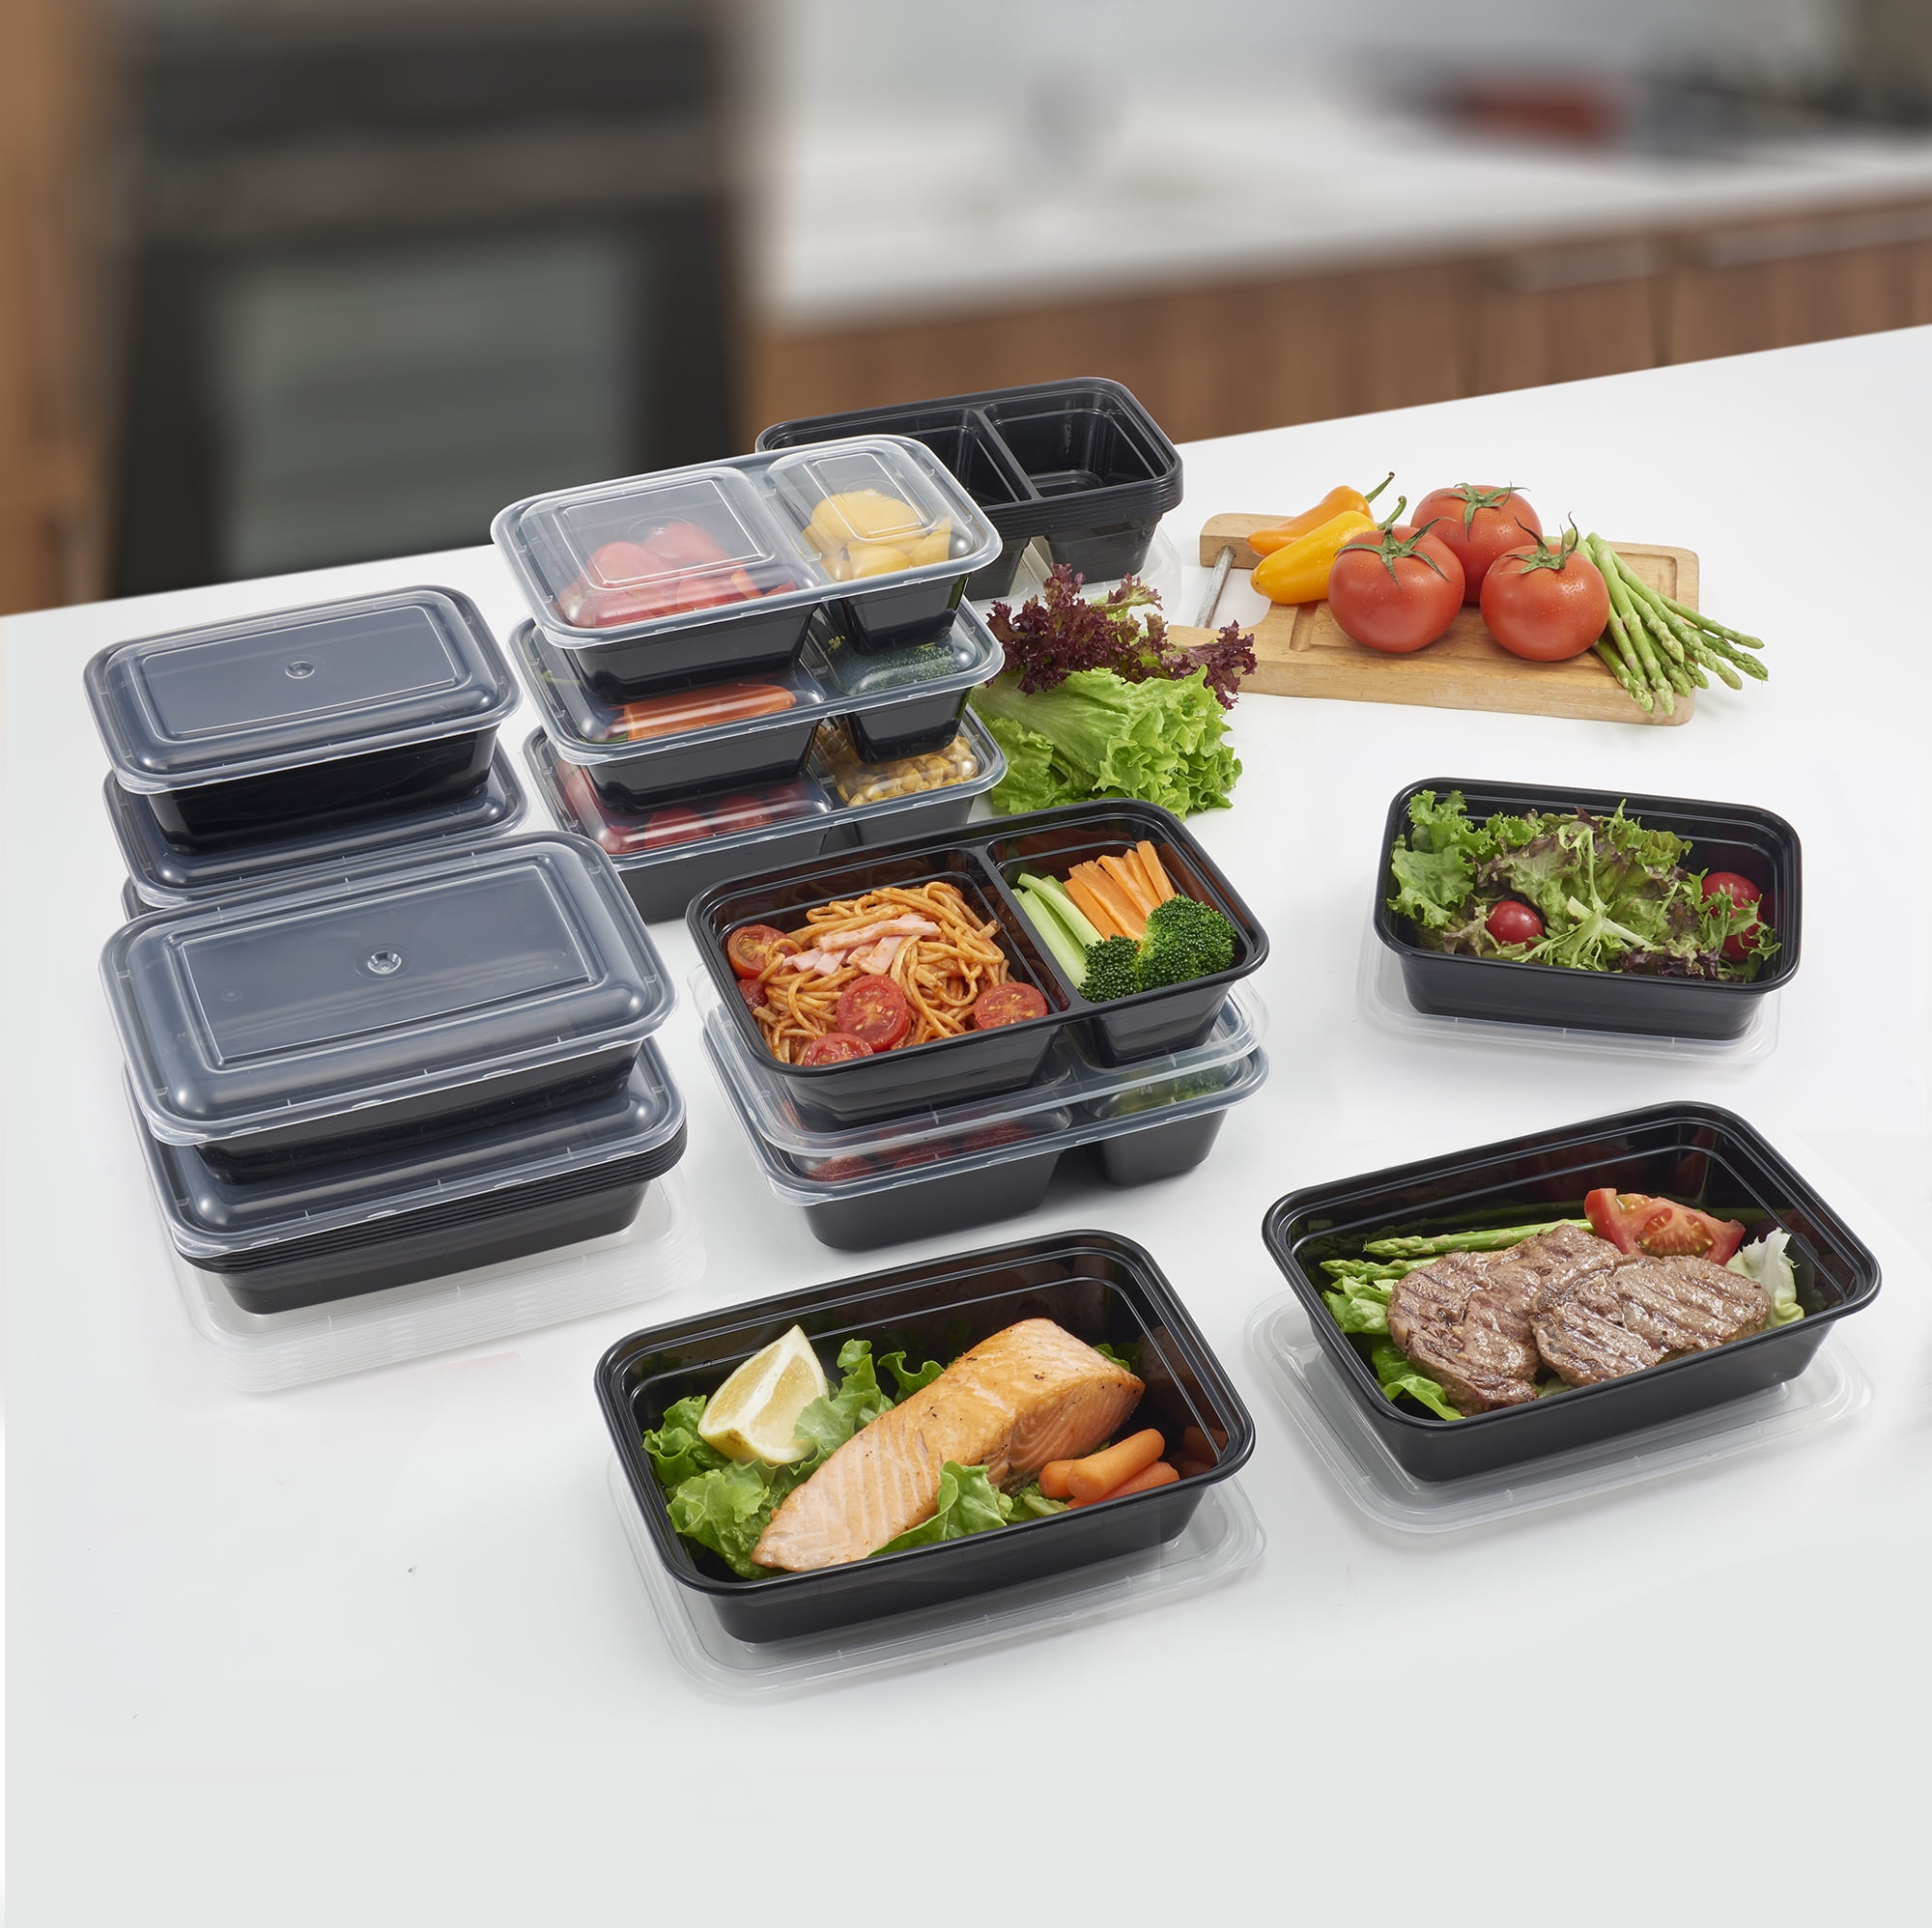 Mainstays 2 Compartment Meal Prep Food Storage Container, 5 Pack